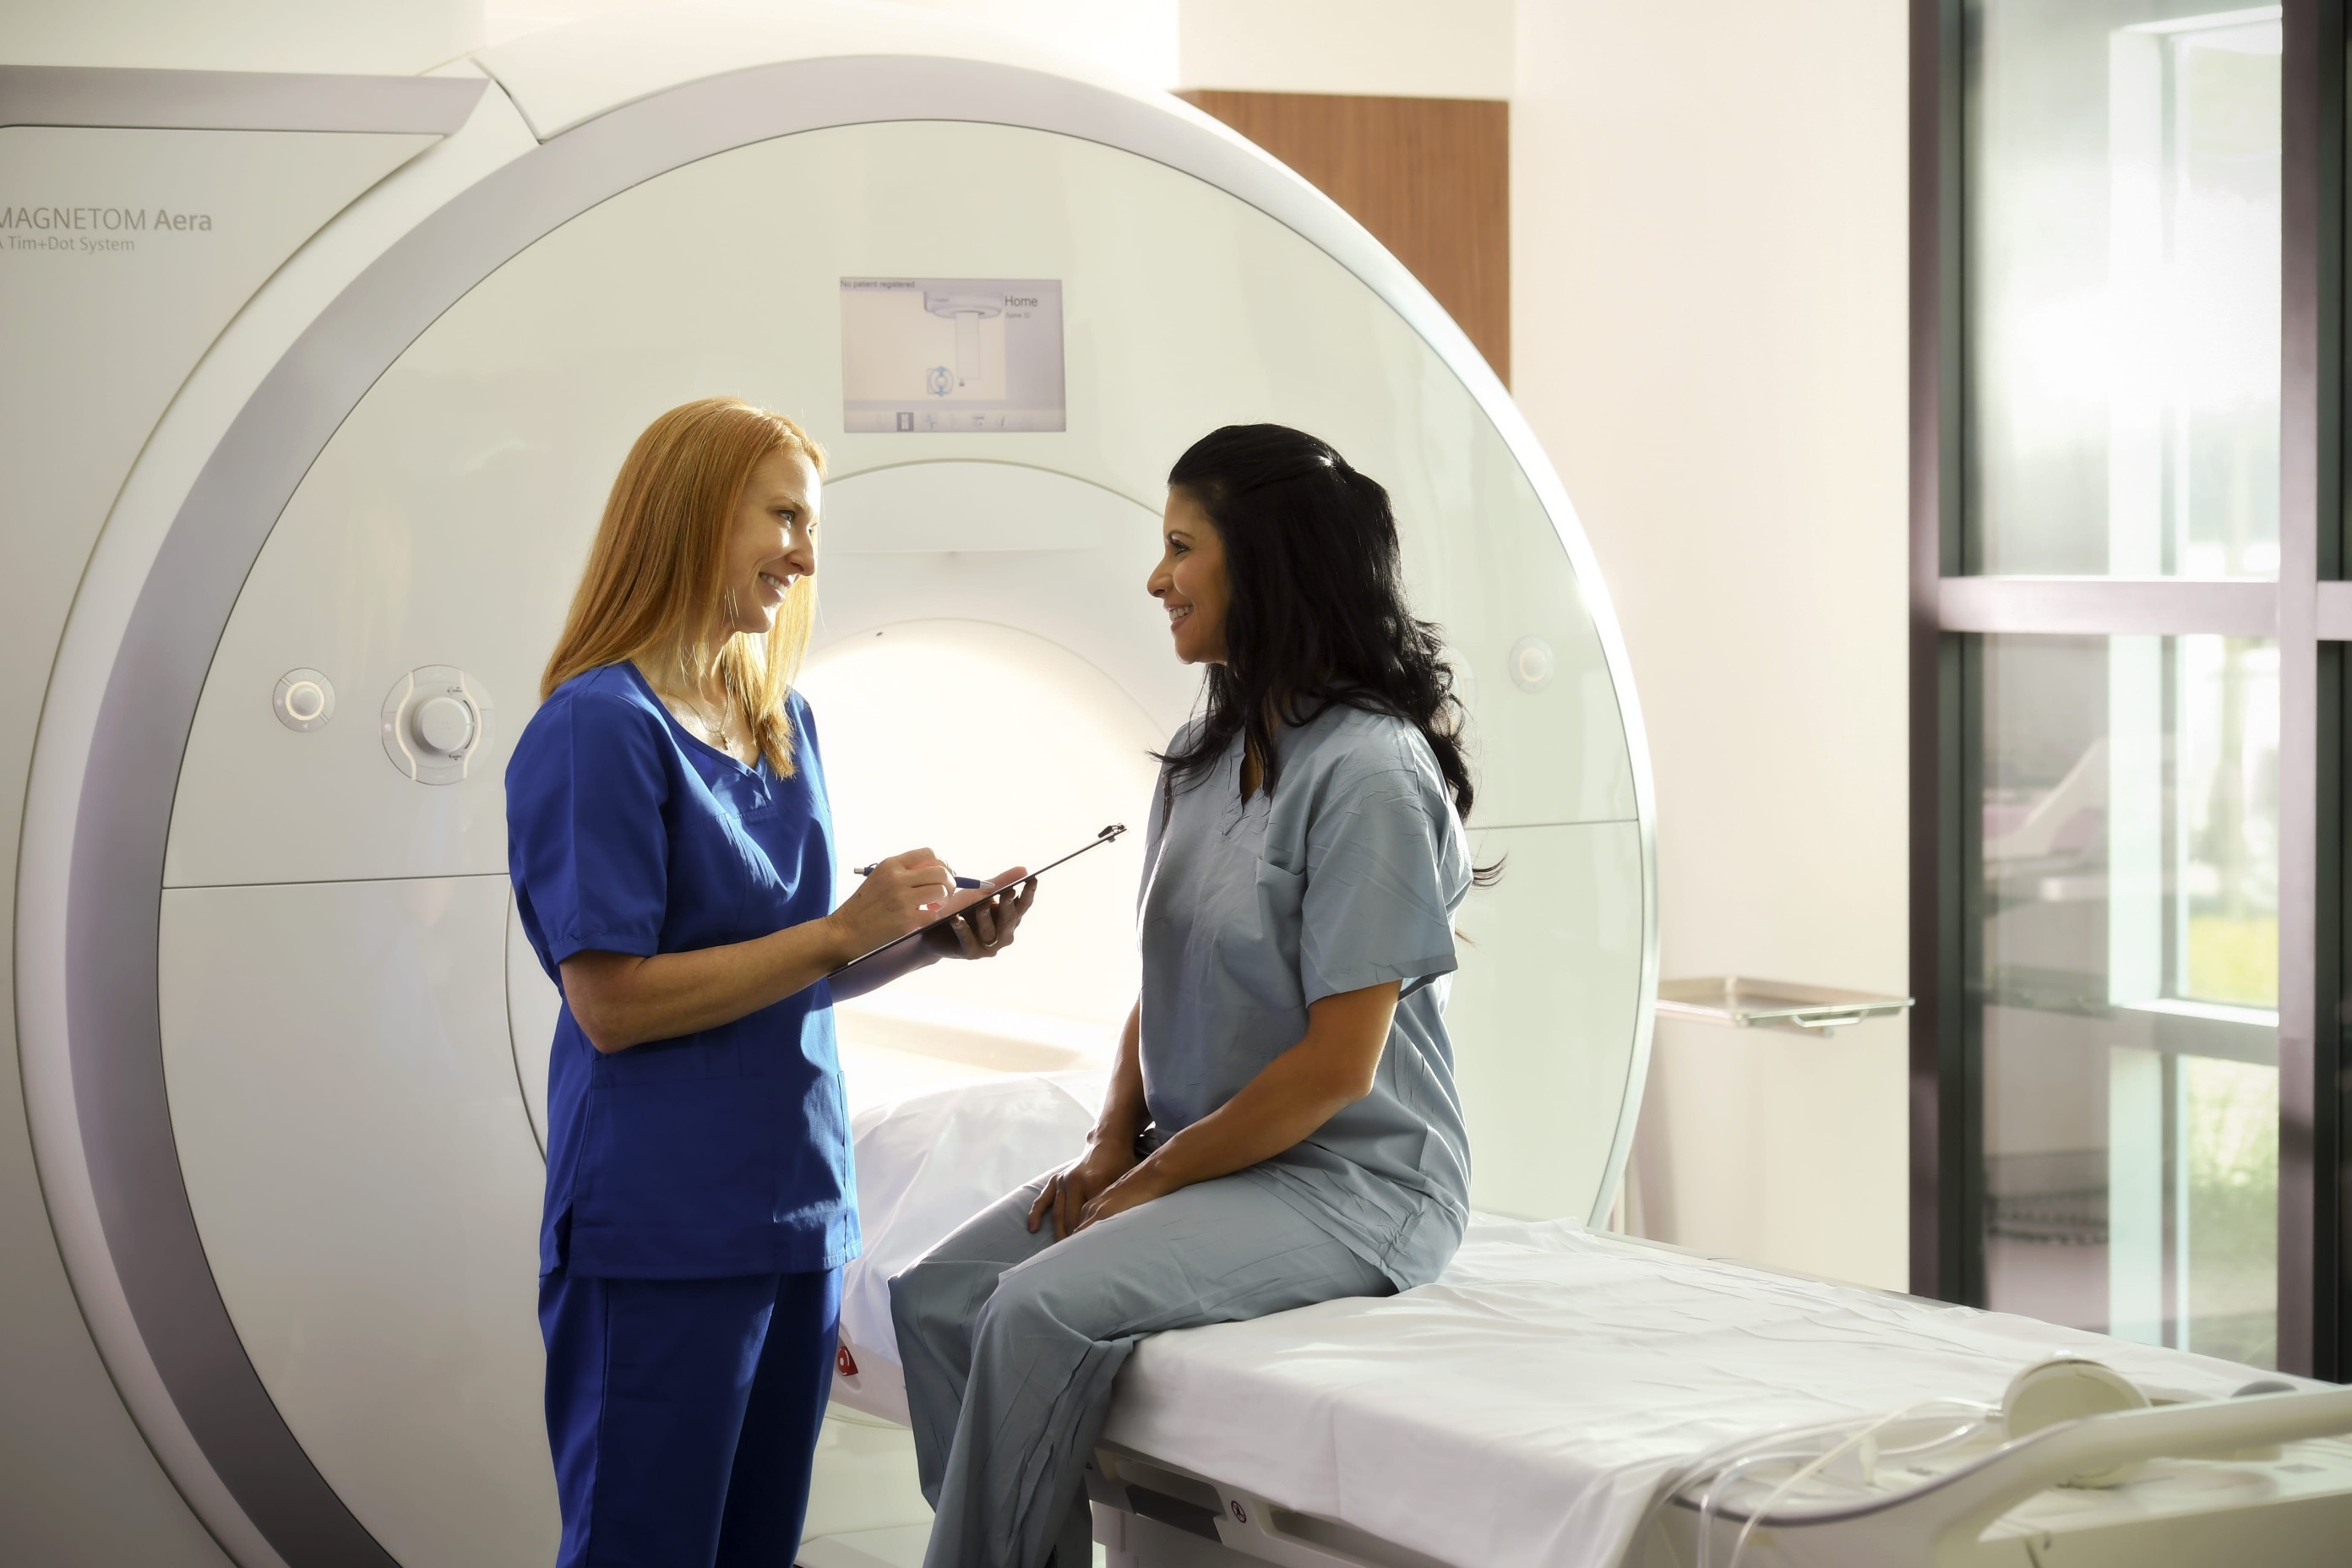 A bone marrow transplant patient and cancer care specialist talk in front of an CT scan machine